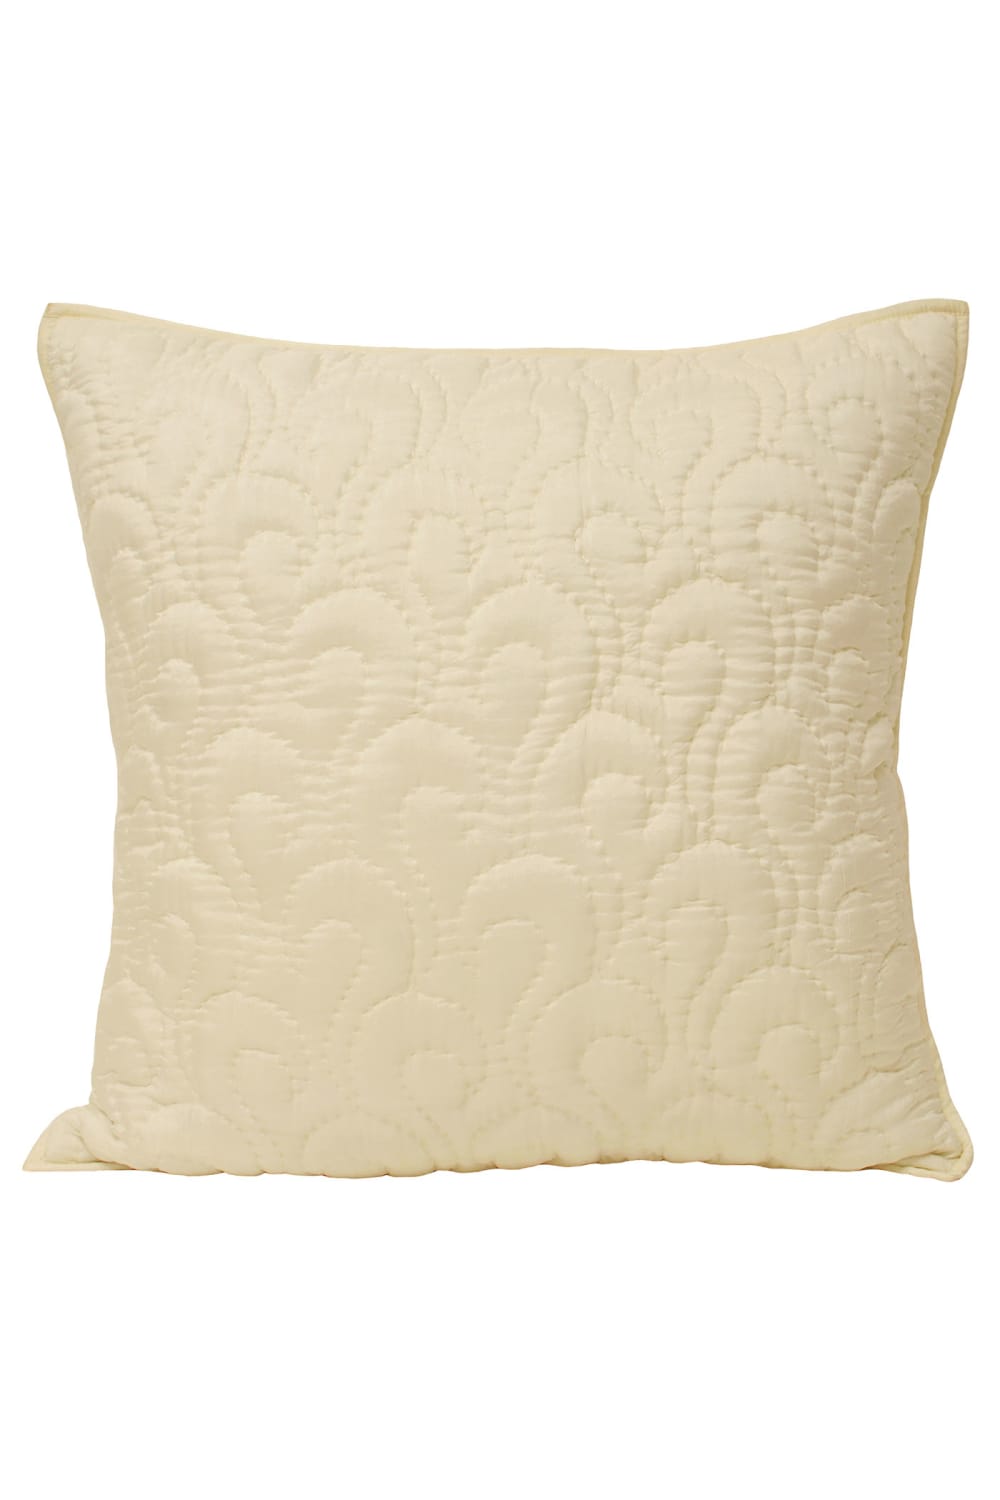 Riva Home Nimes Silk Cushion Cover (Cushion Pad Not Included) (Ivory) (22in x 22in)